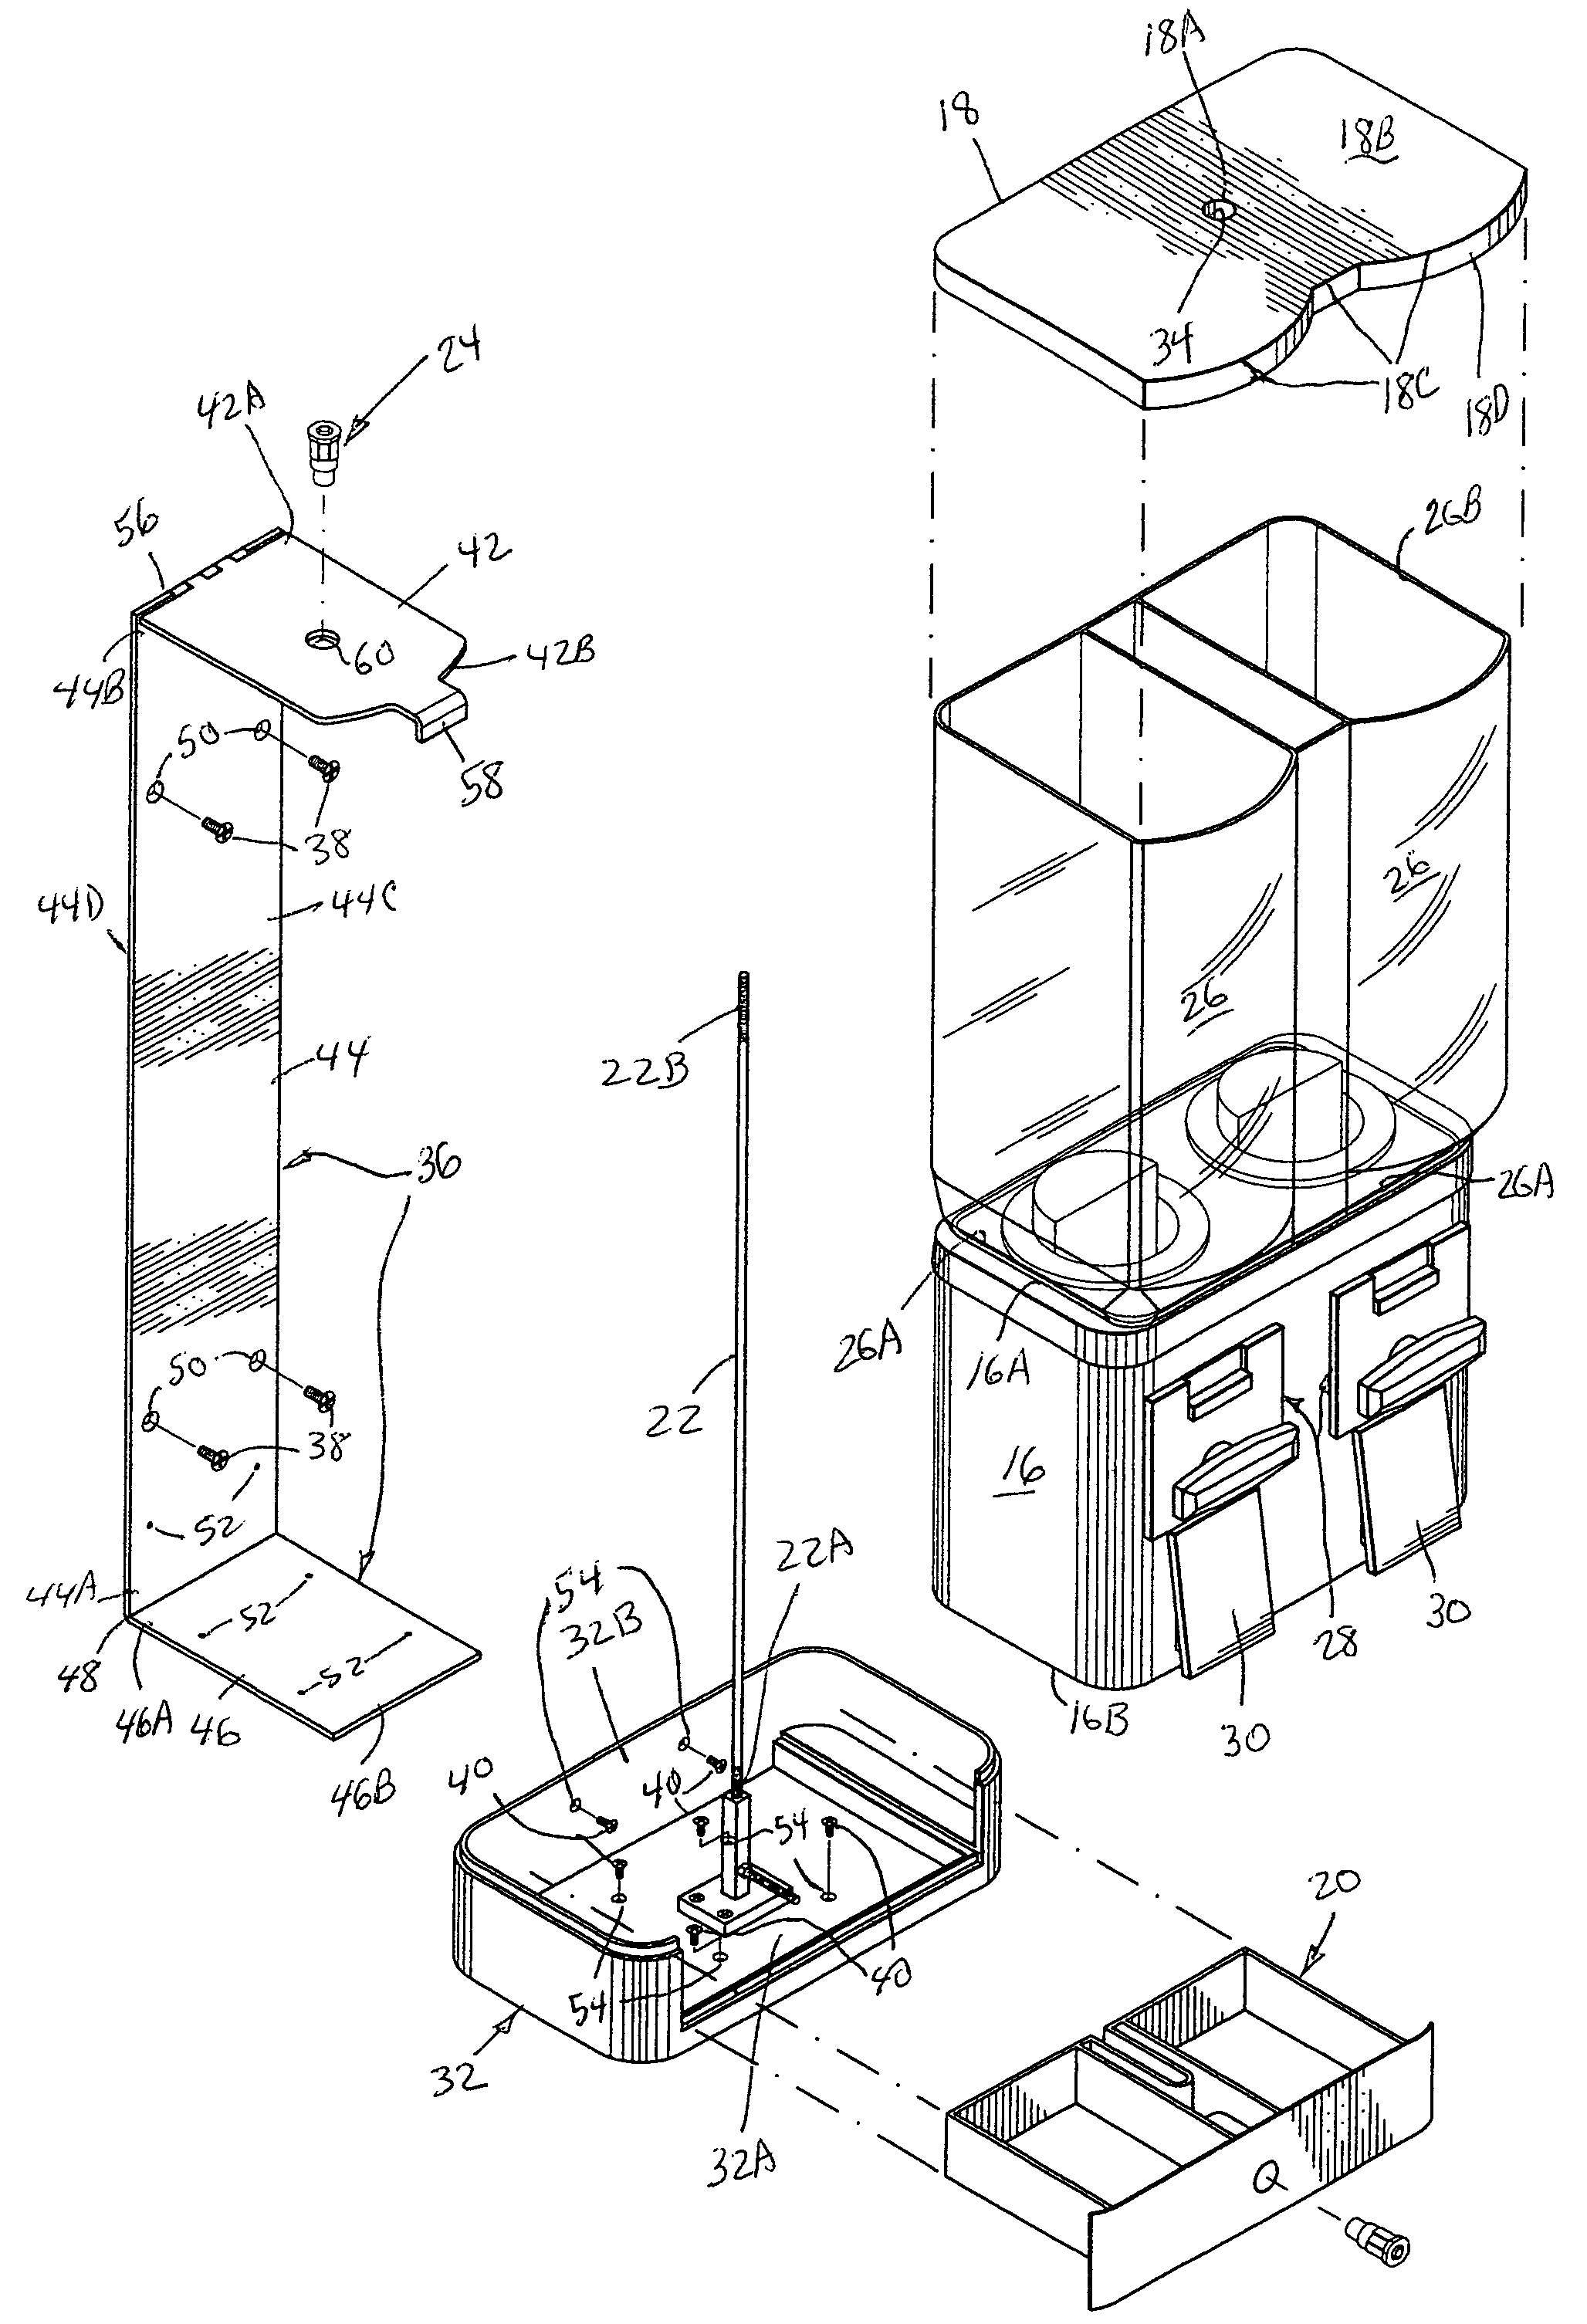 Wall-mountable vending machine support bracket and assembly